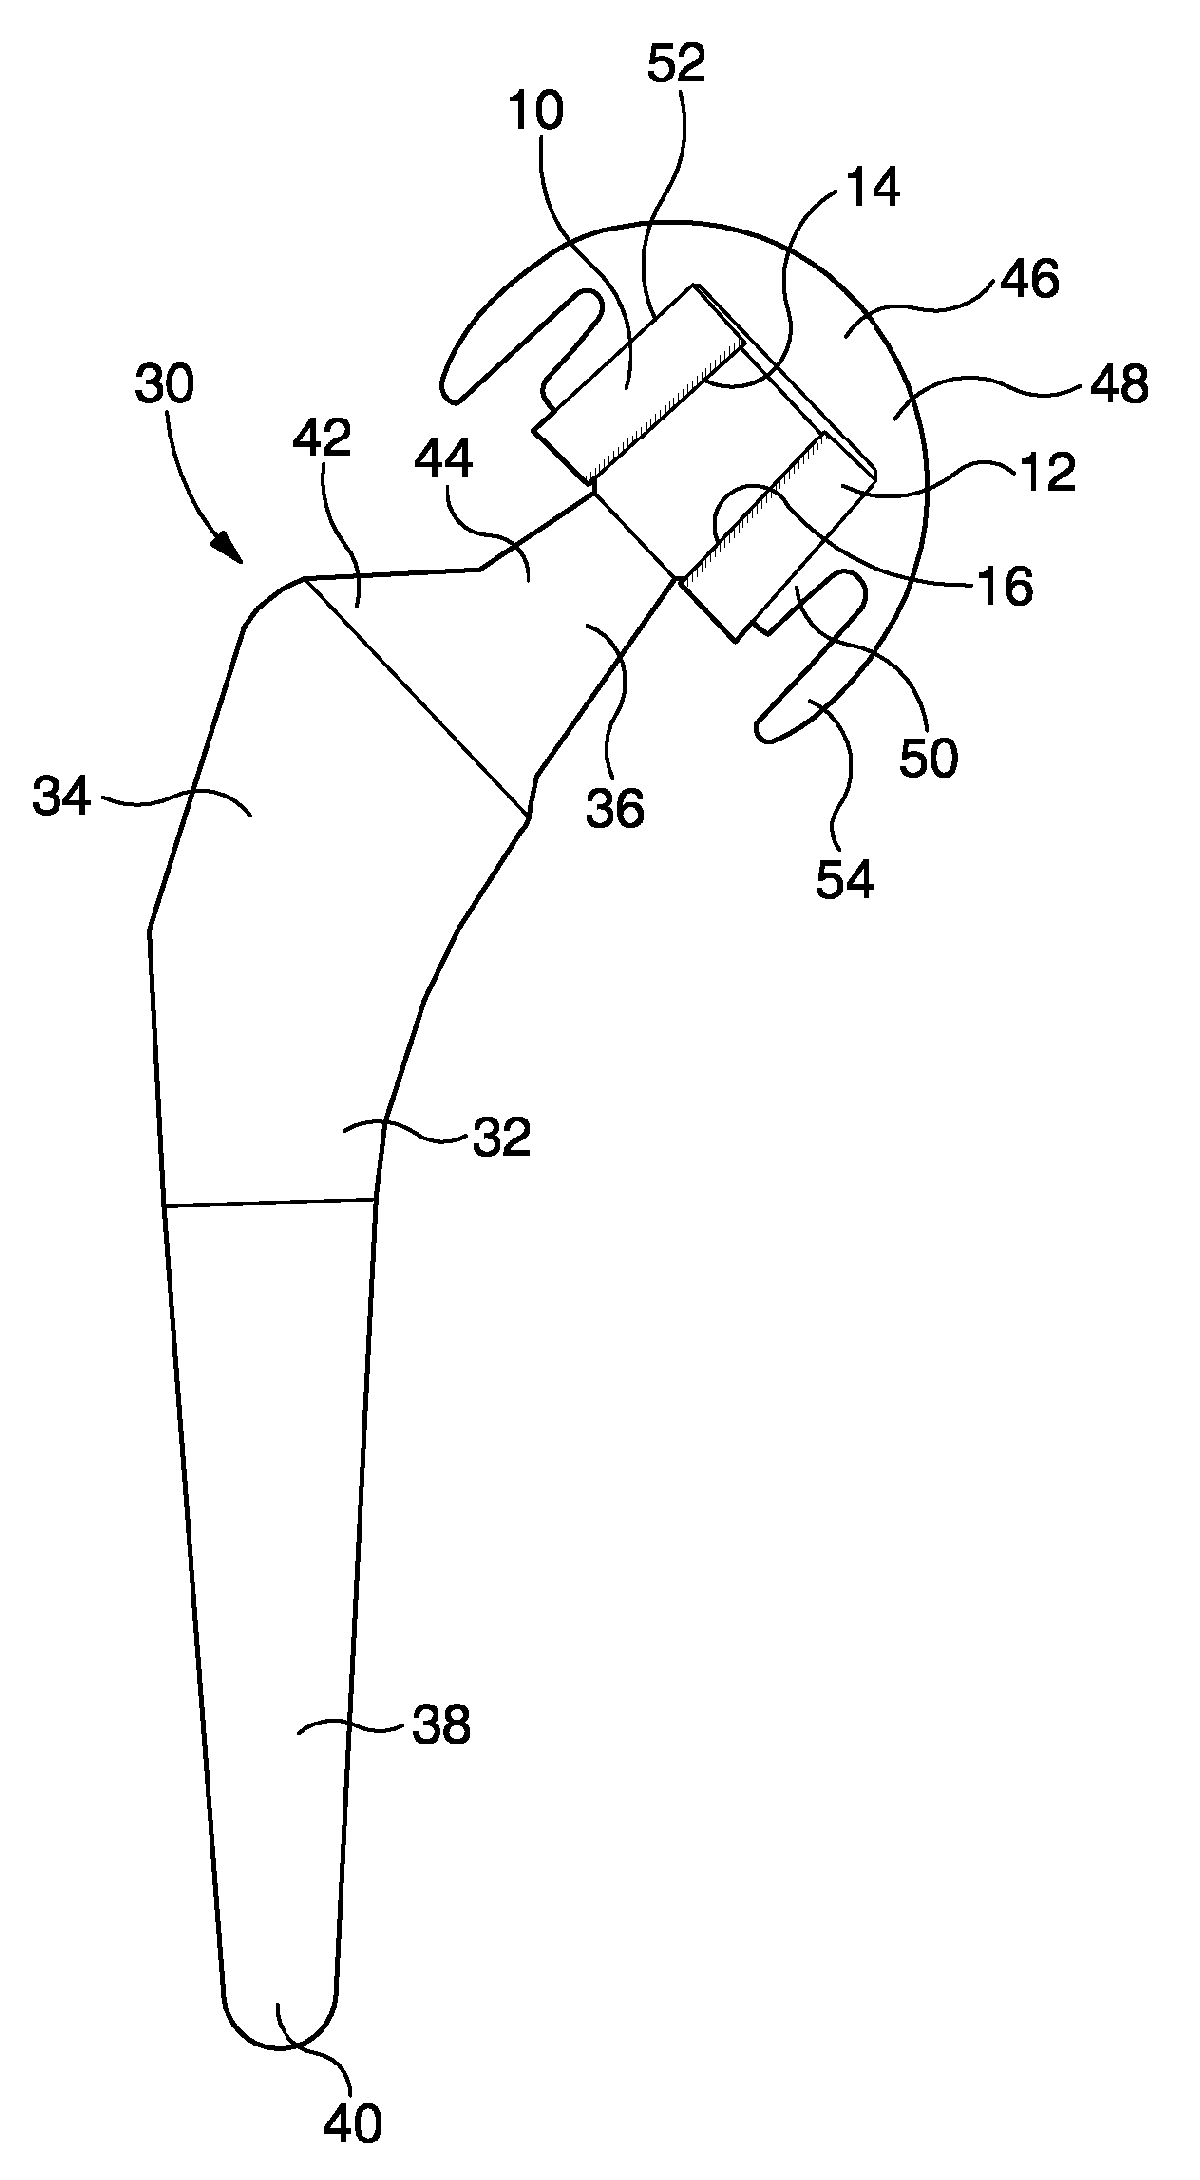 Prosthesis having a large femoral head